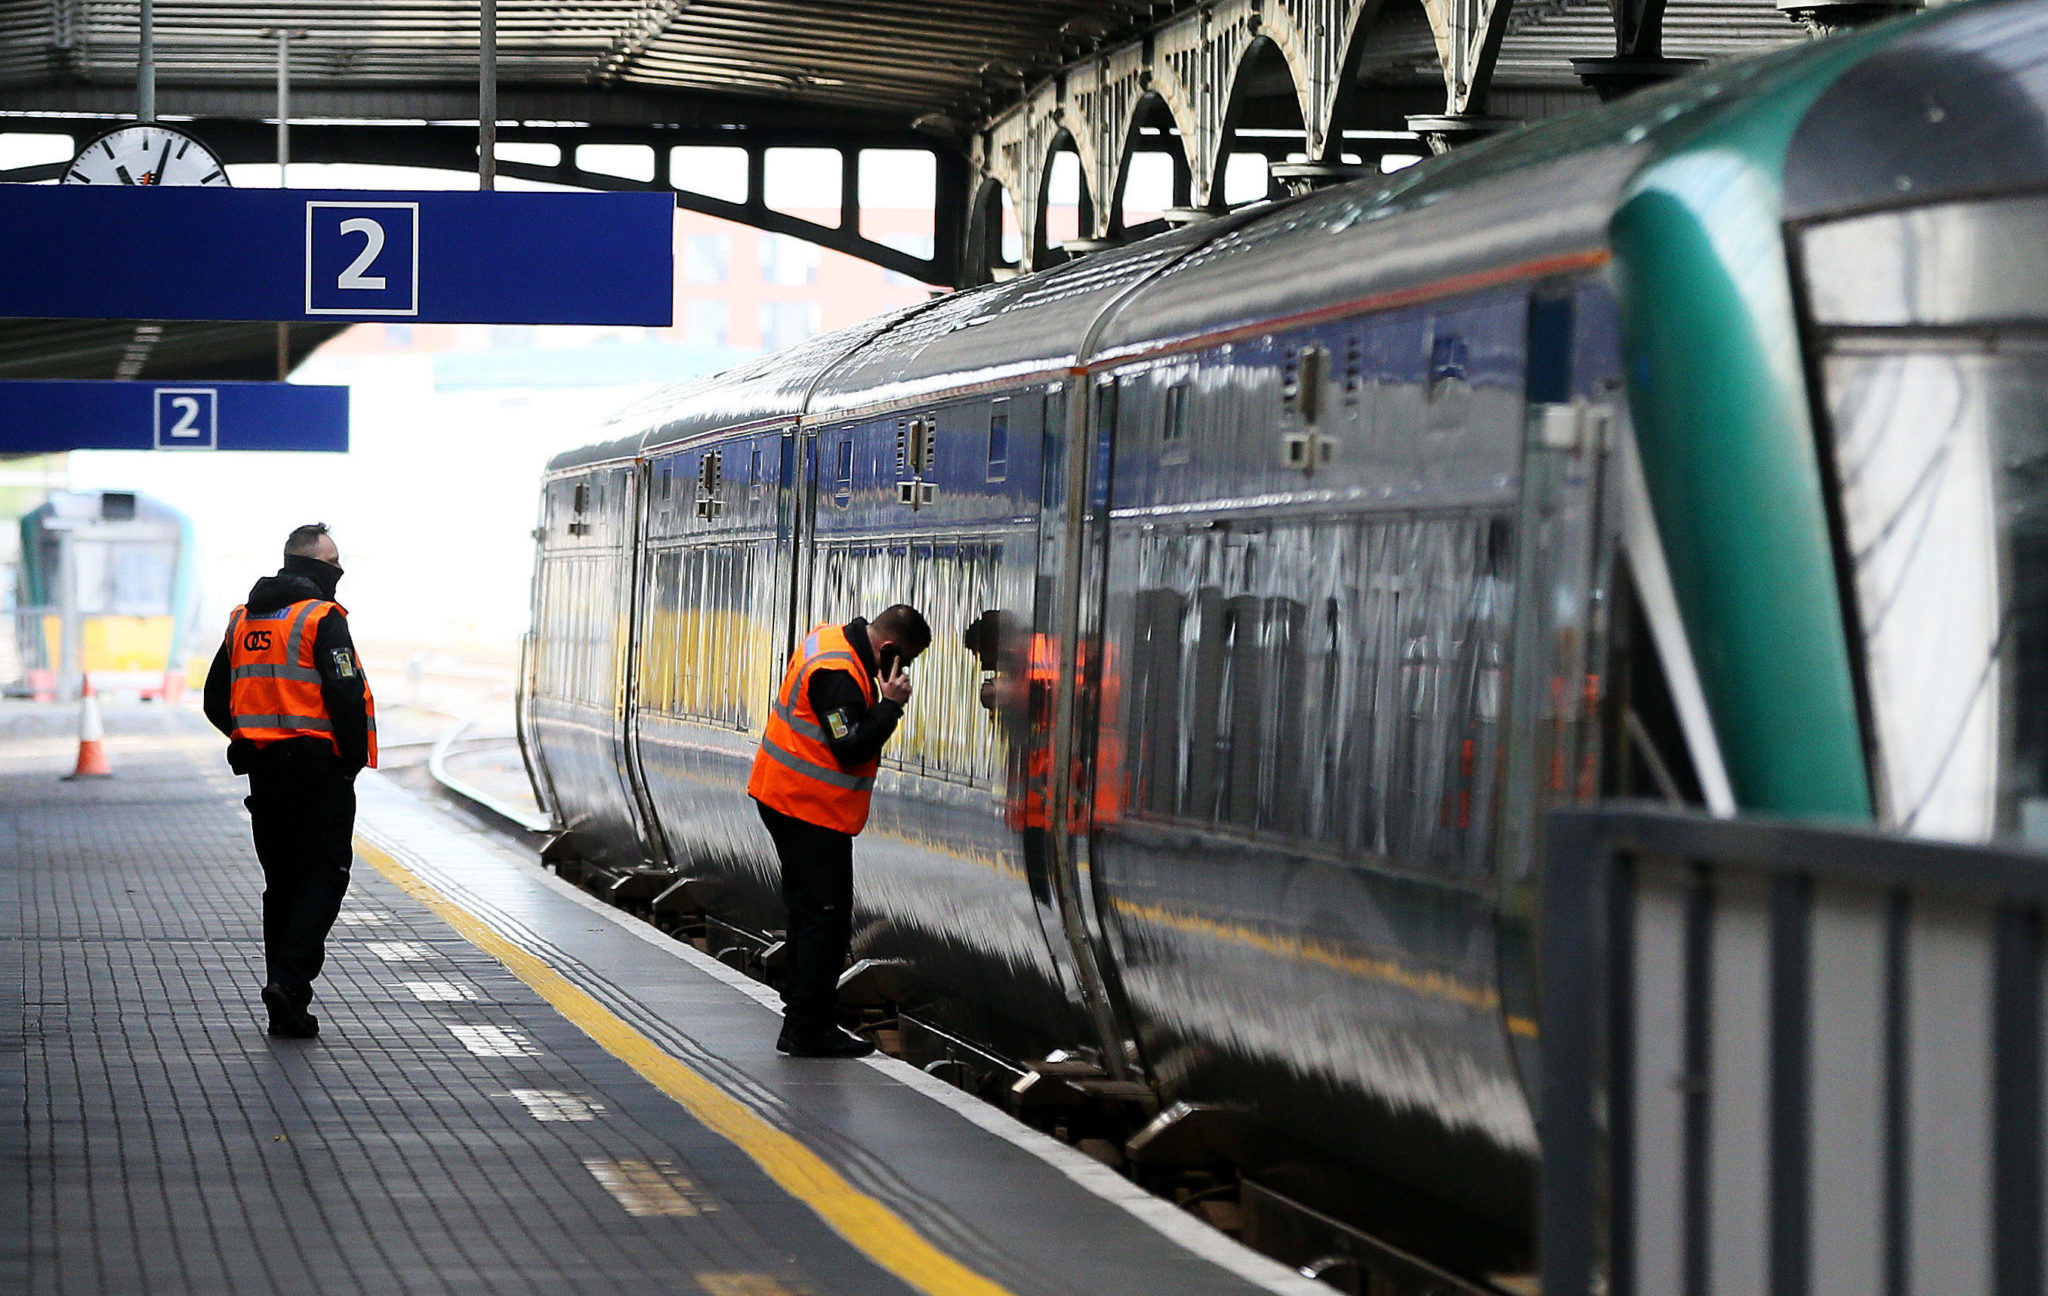 Security staff walk the platforms at Heuston Station, Dublin in November 2017